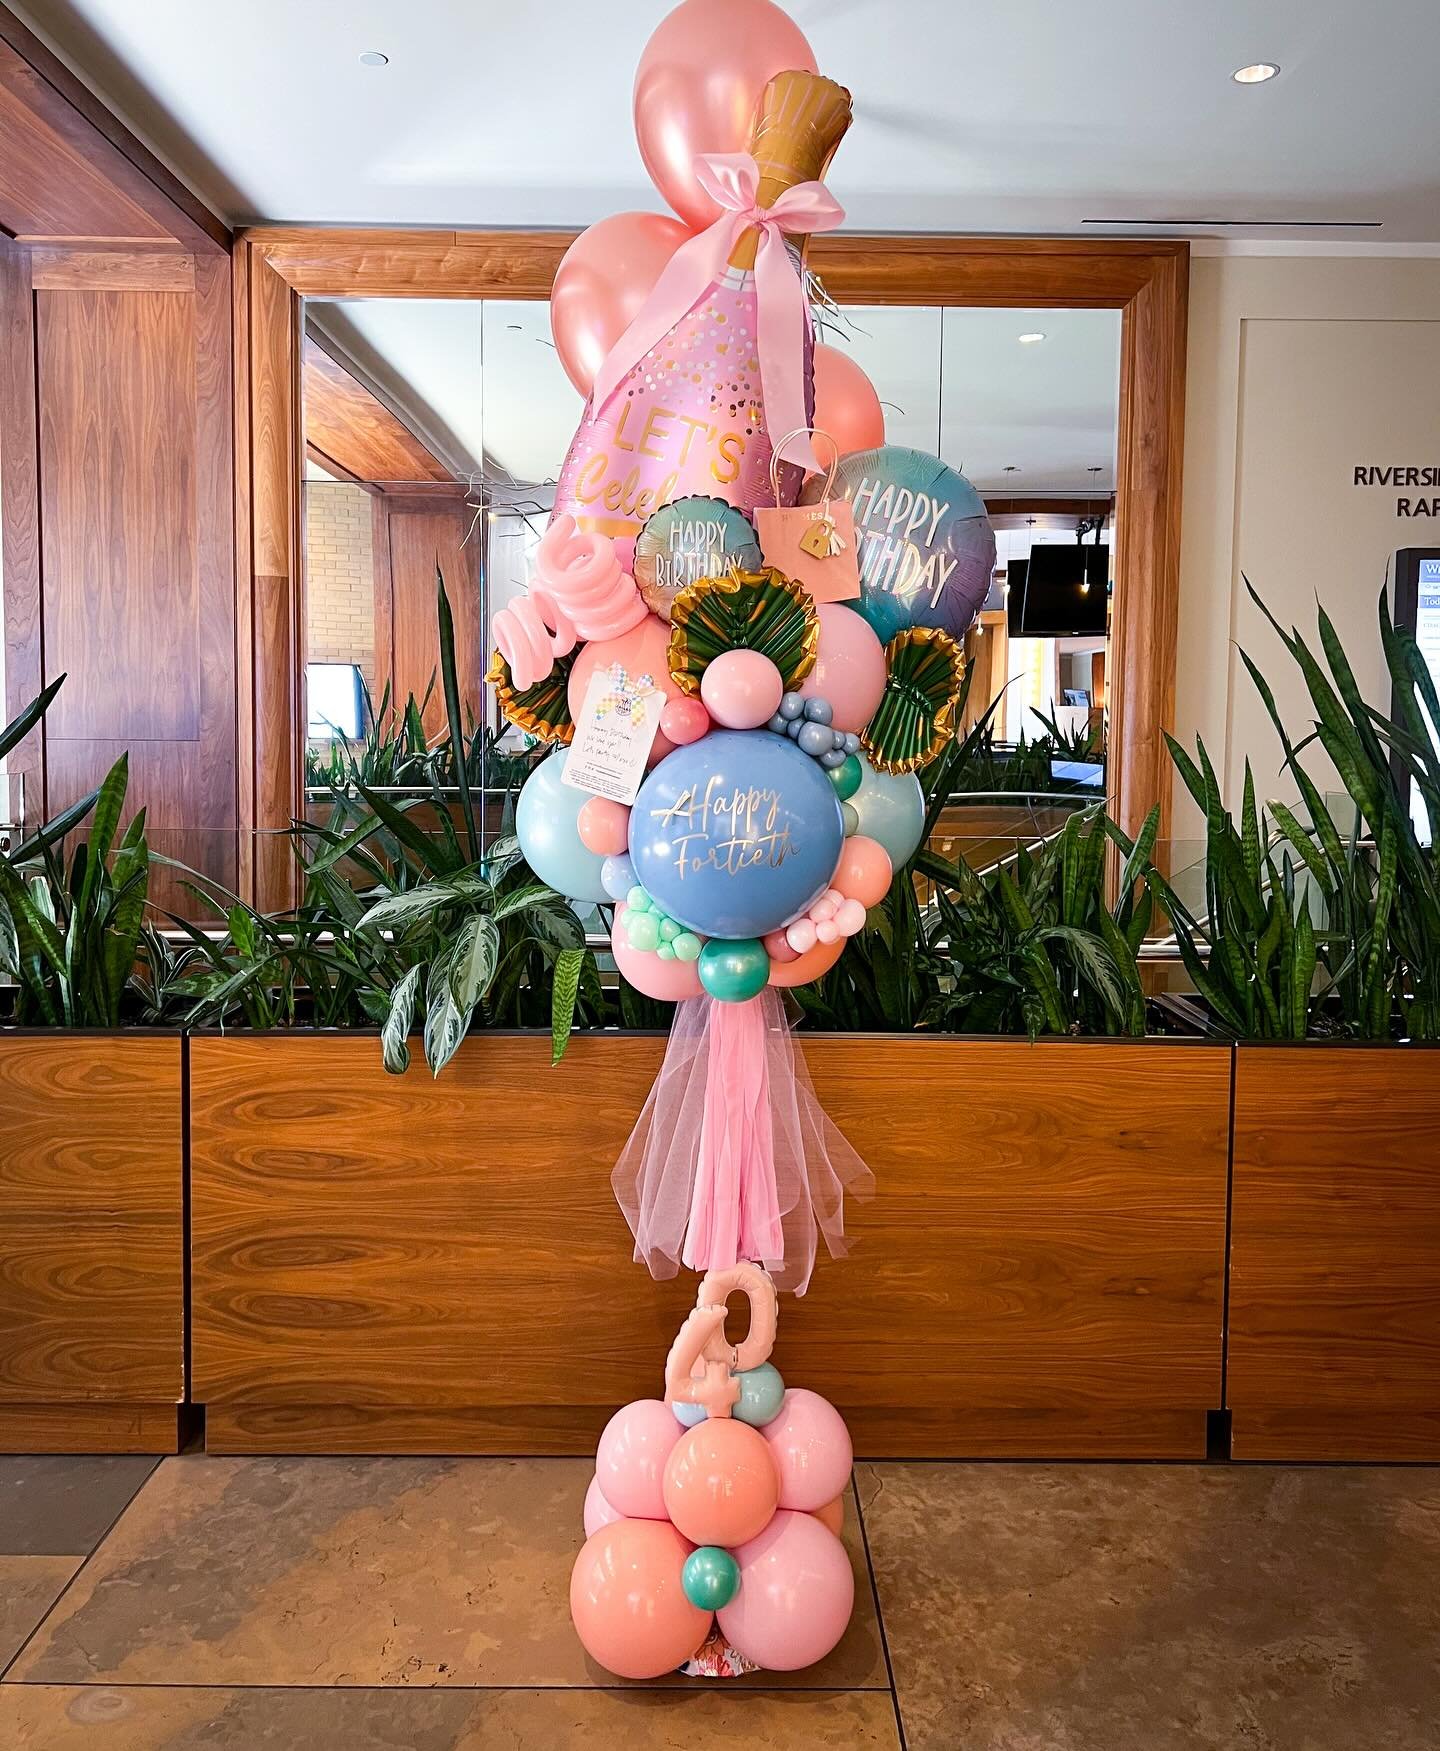 Transport me to Palm Springs! 🌵👙👜🌴
.
.
.
. #balloontower #balloon #birthdayballoons #birthday🎂 #balloons #organic balloons #balloonprofessional #balloonmosaic ballooncolumn #balloonarrangement #balloonmarquee #obsessed #🎈 #vail #balloonstylist 